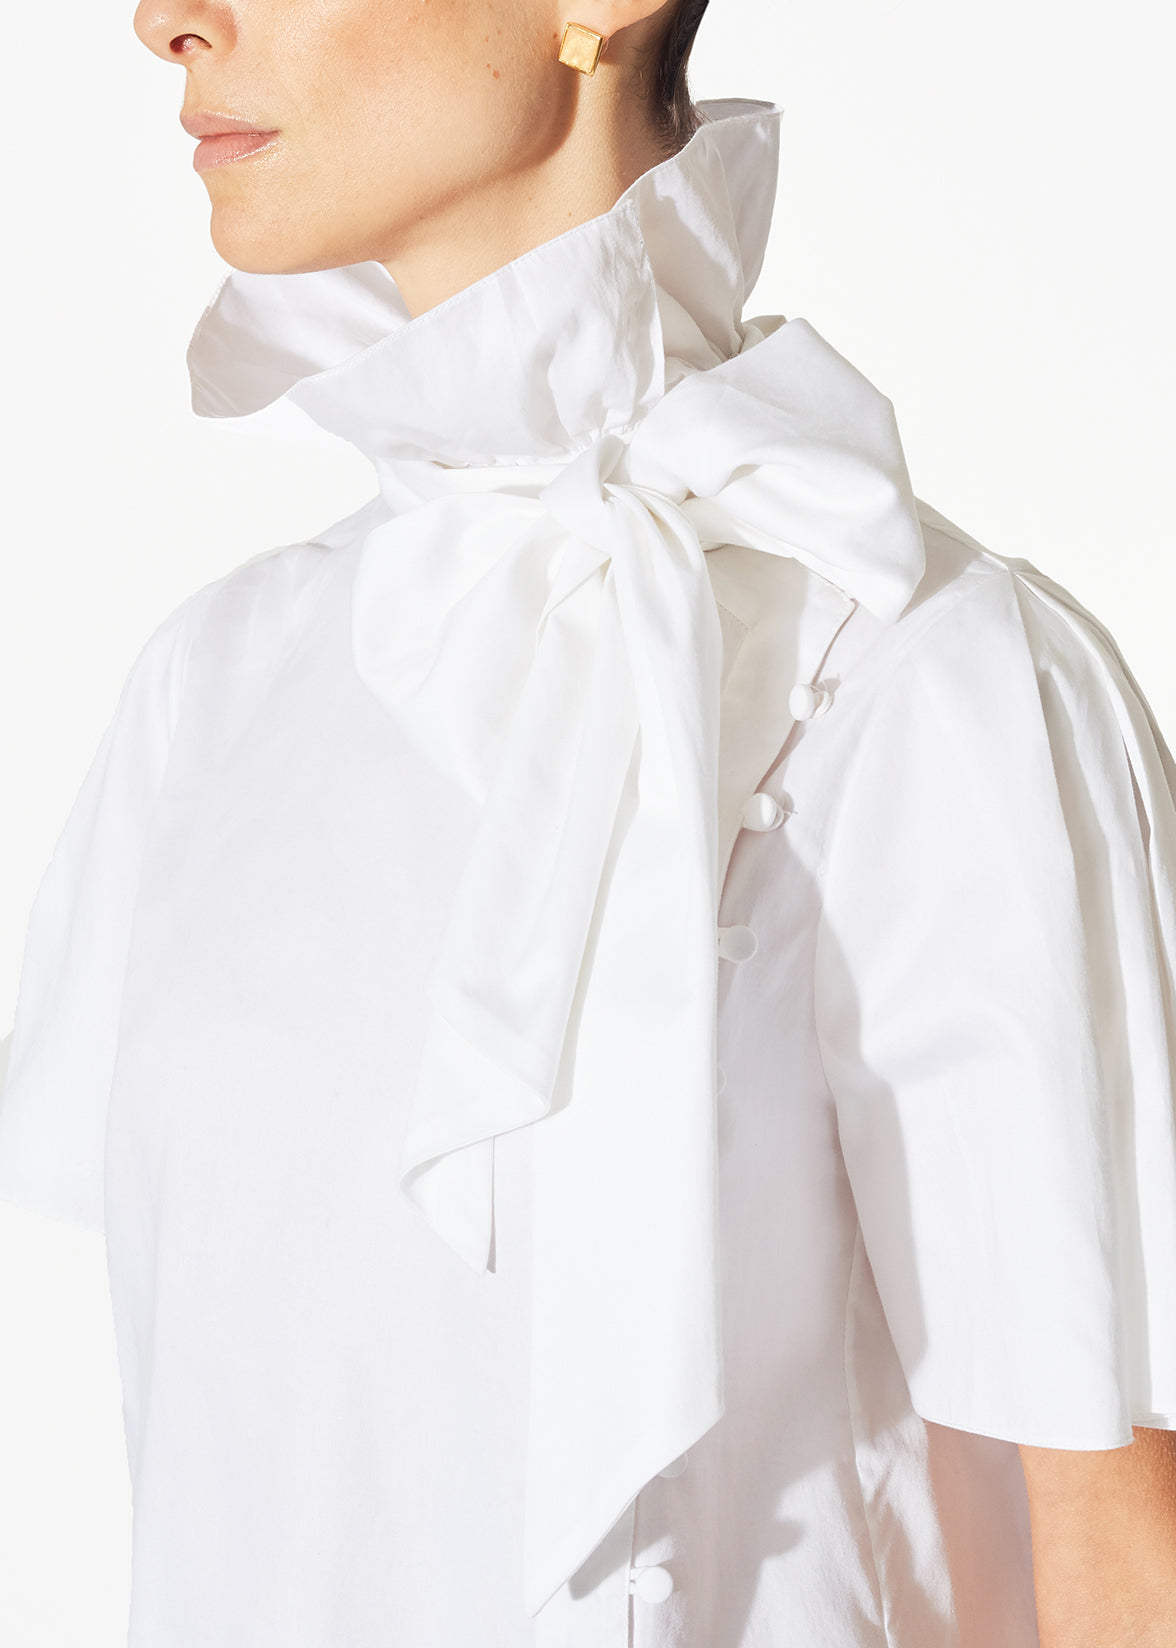 BOW NECK BLOUSE IN COTTON SHIRTING